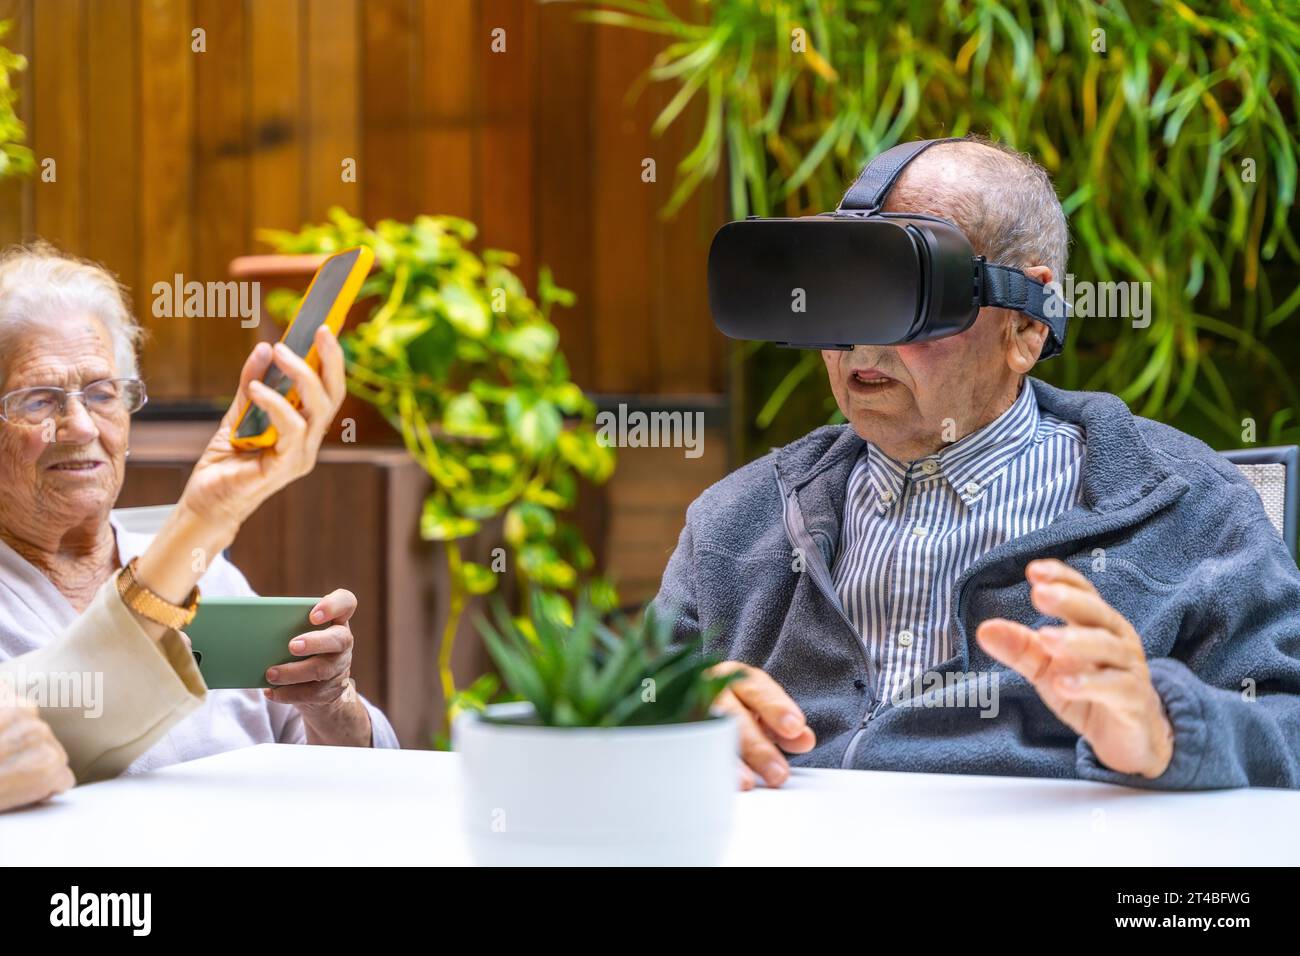 Virtual reality experience for elder people in a geriatric sitting on a garden Stock Photo